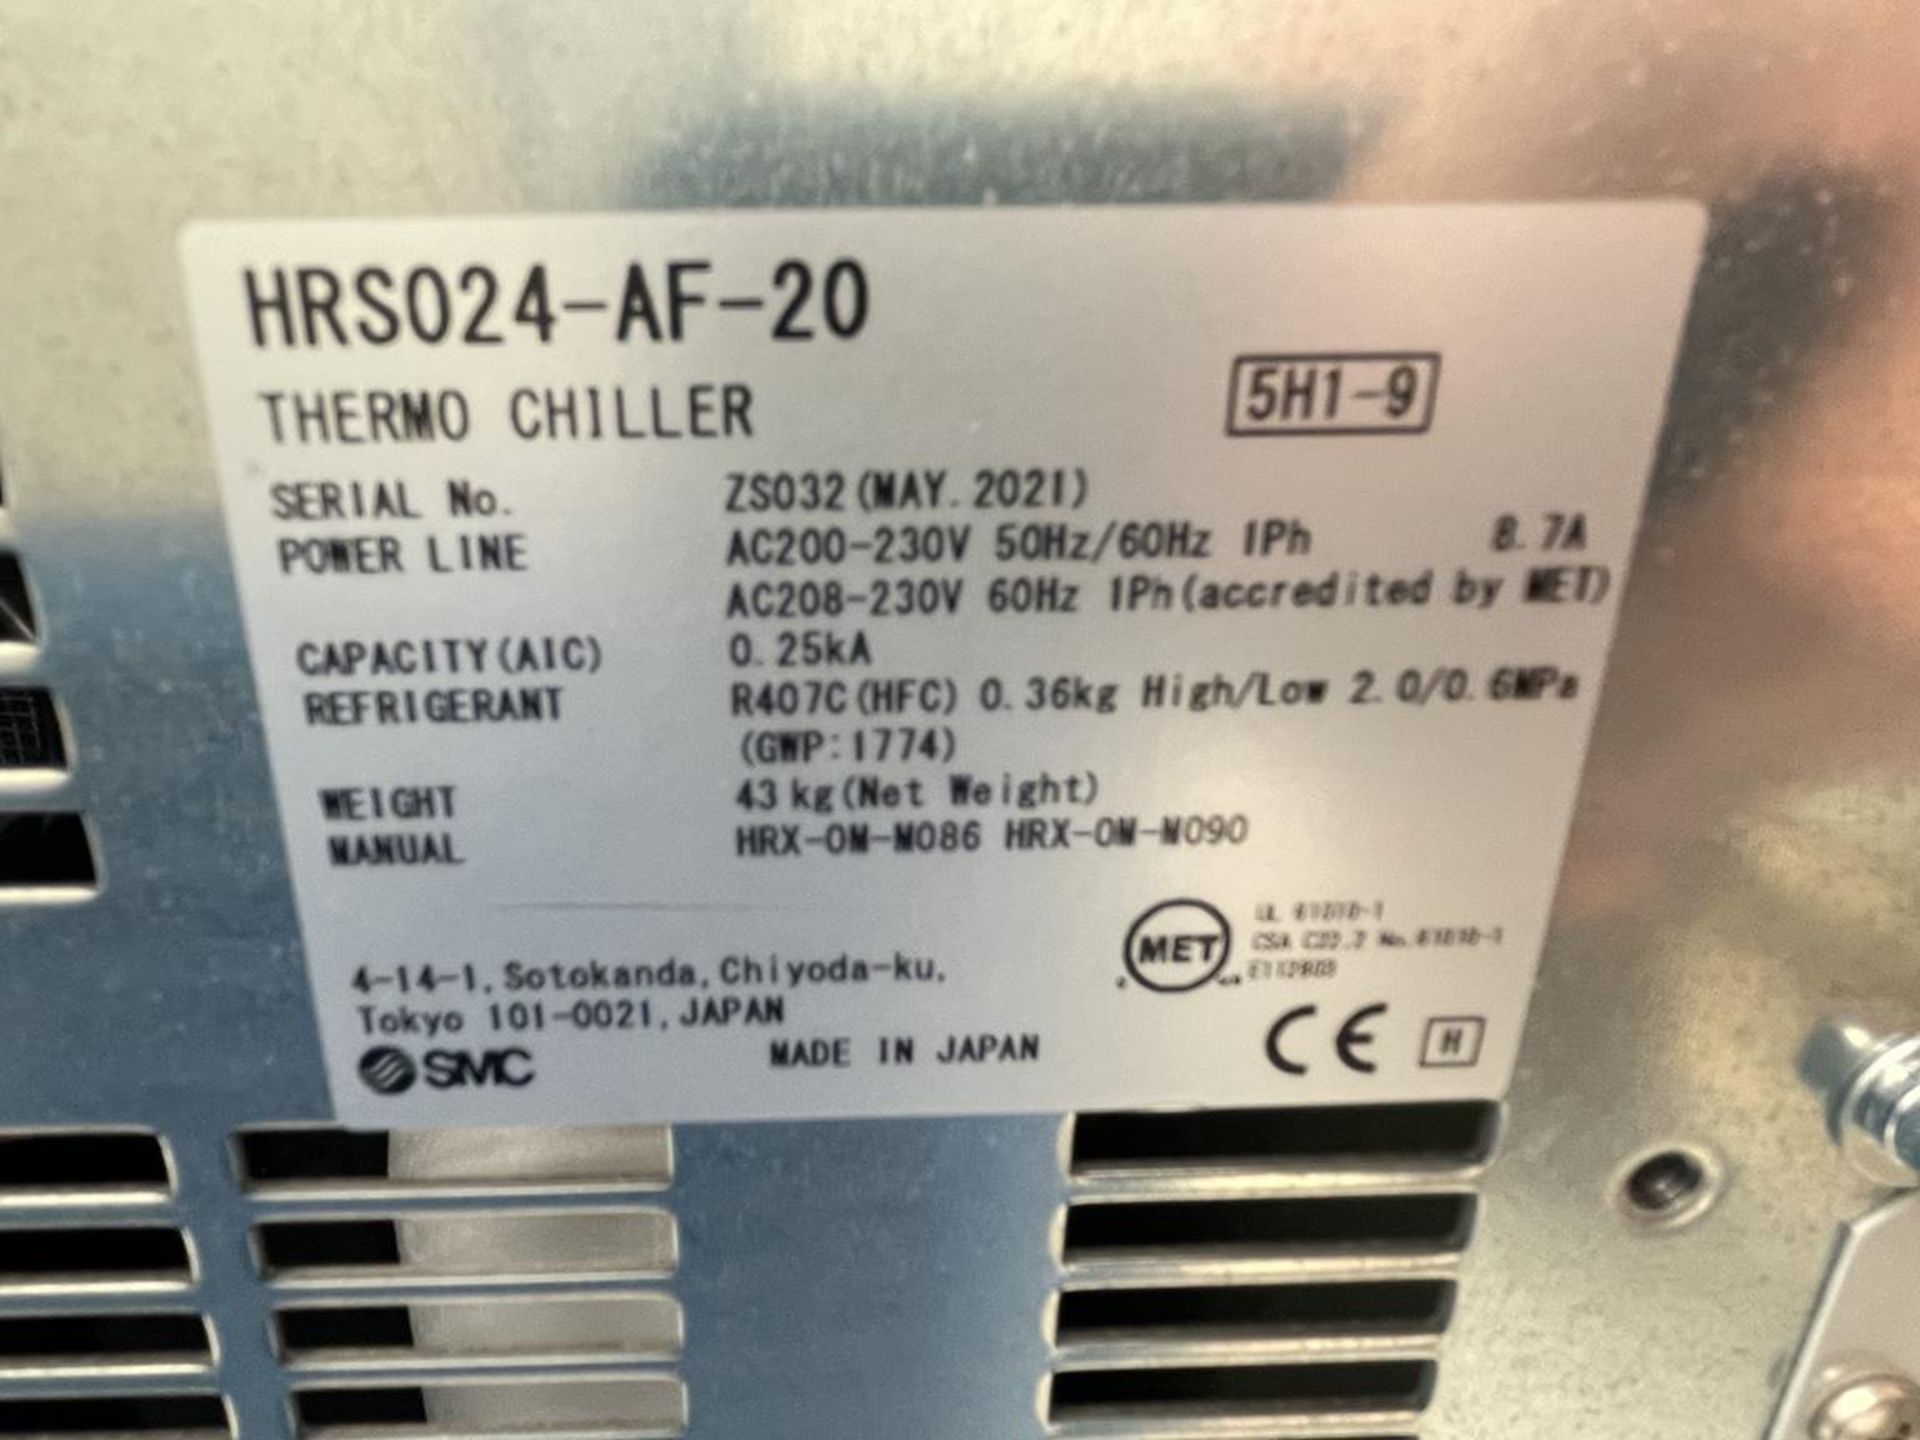 SCM S&A, HRS024-AF-20 thermo chiller, Serial No. ZS032 (DOM: 2021) - Image 2 of 2